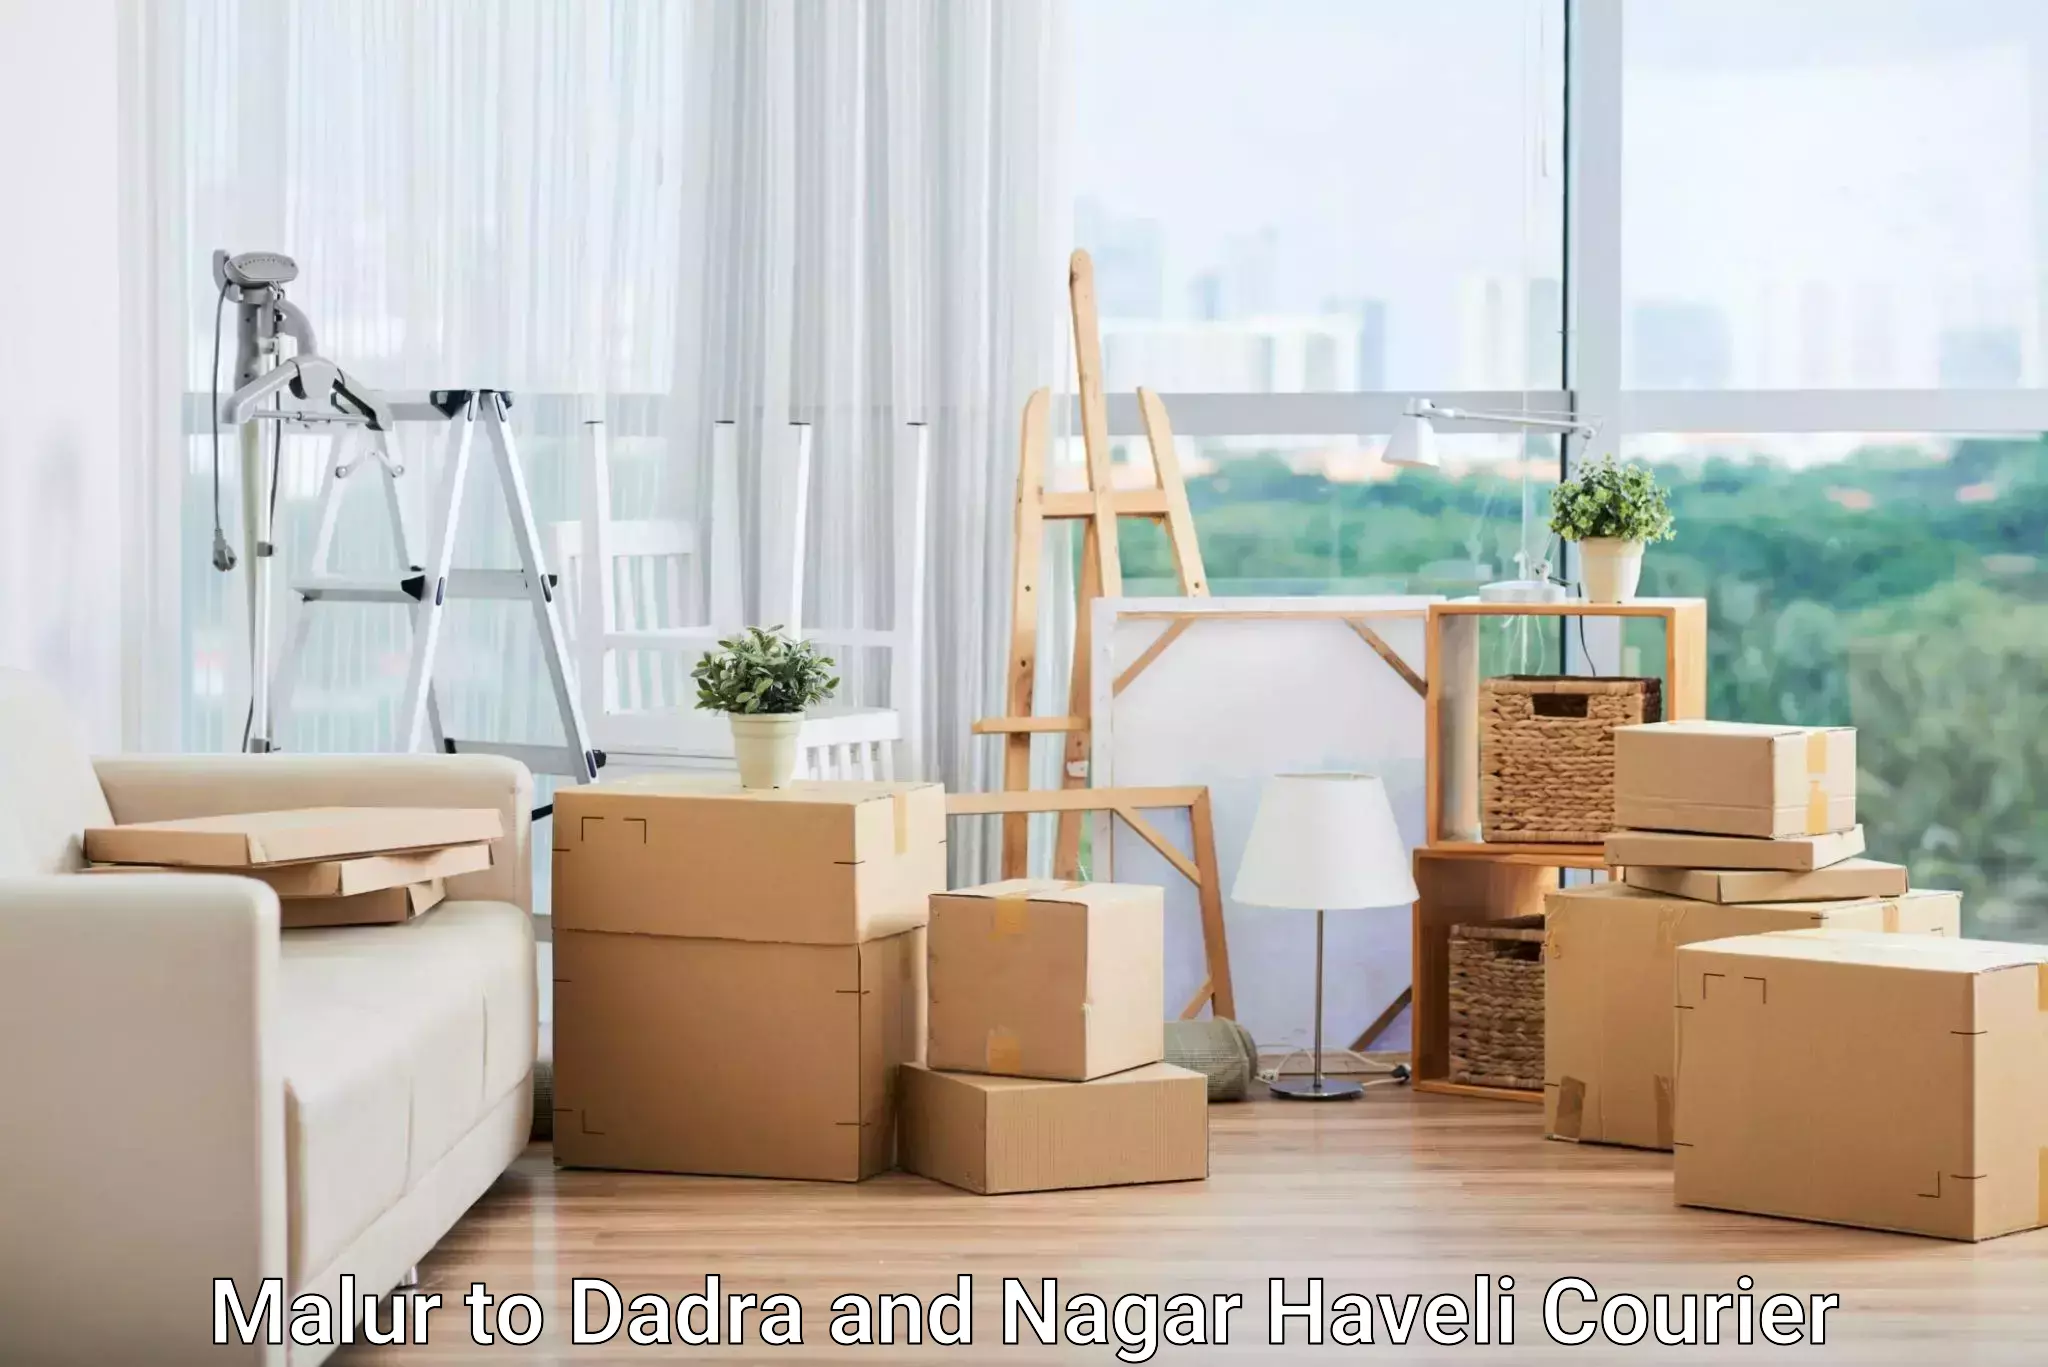 Efficient package consolidation in Malur to Dadra and Nagar Haveli